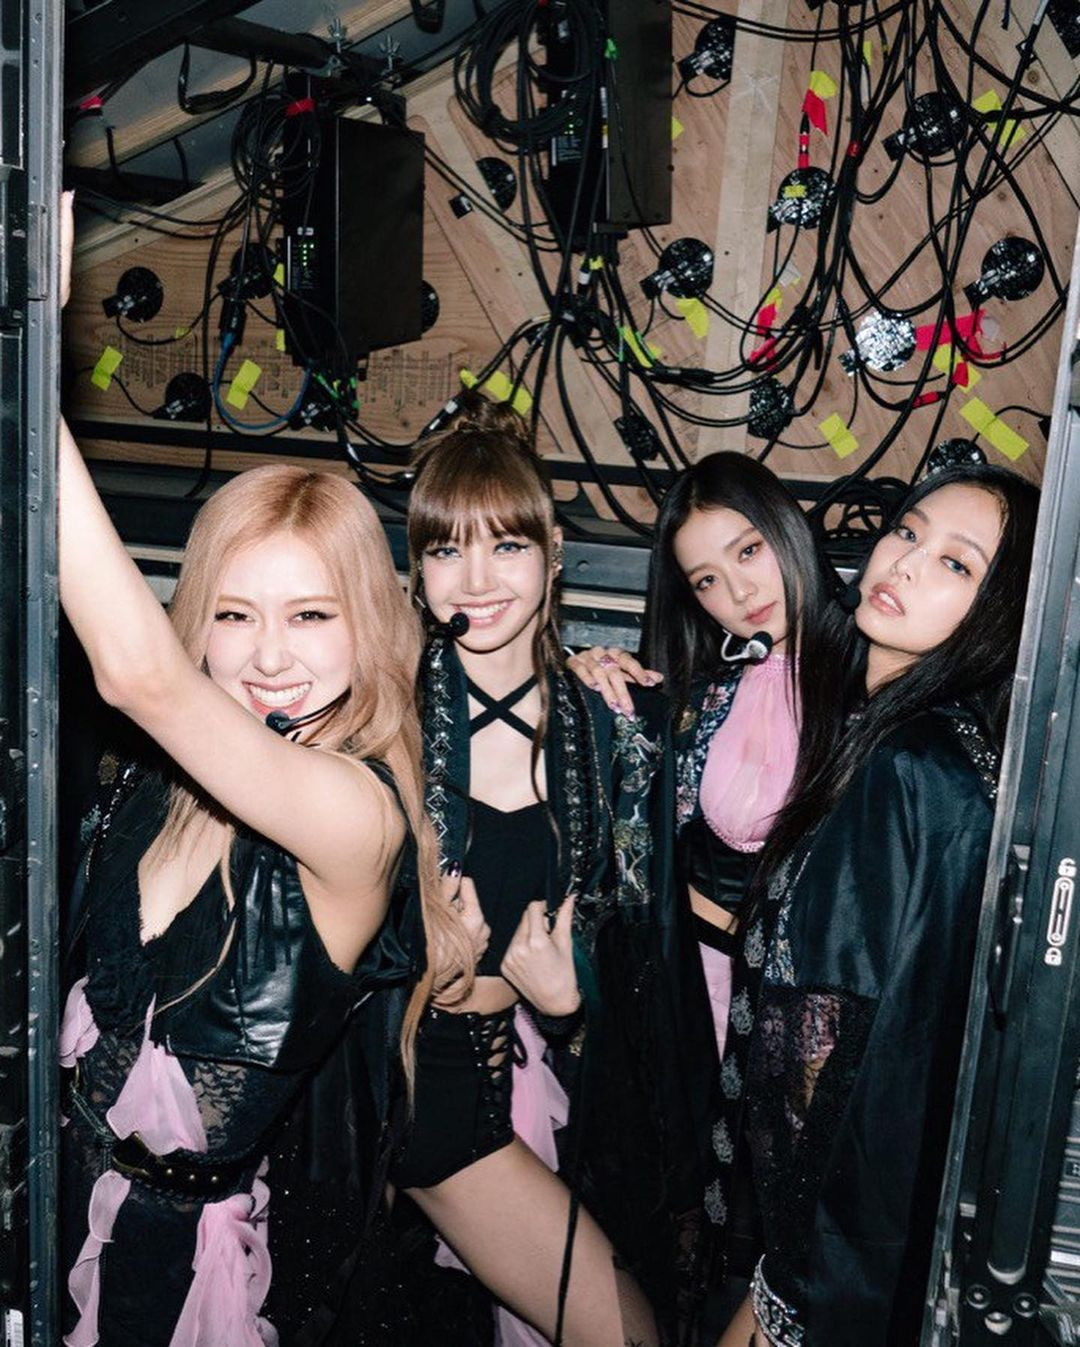 These pictures taken at the Coachella Valley Music and Arts Festival on Saturday show Blackpink members dressed in the black 